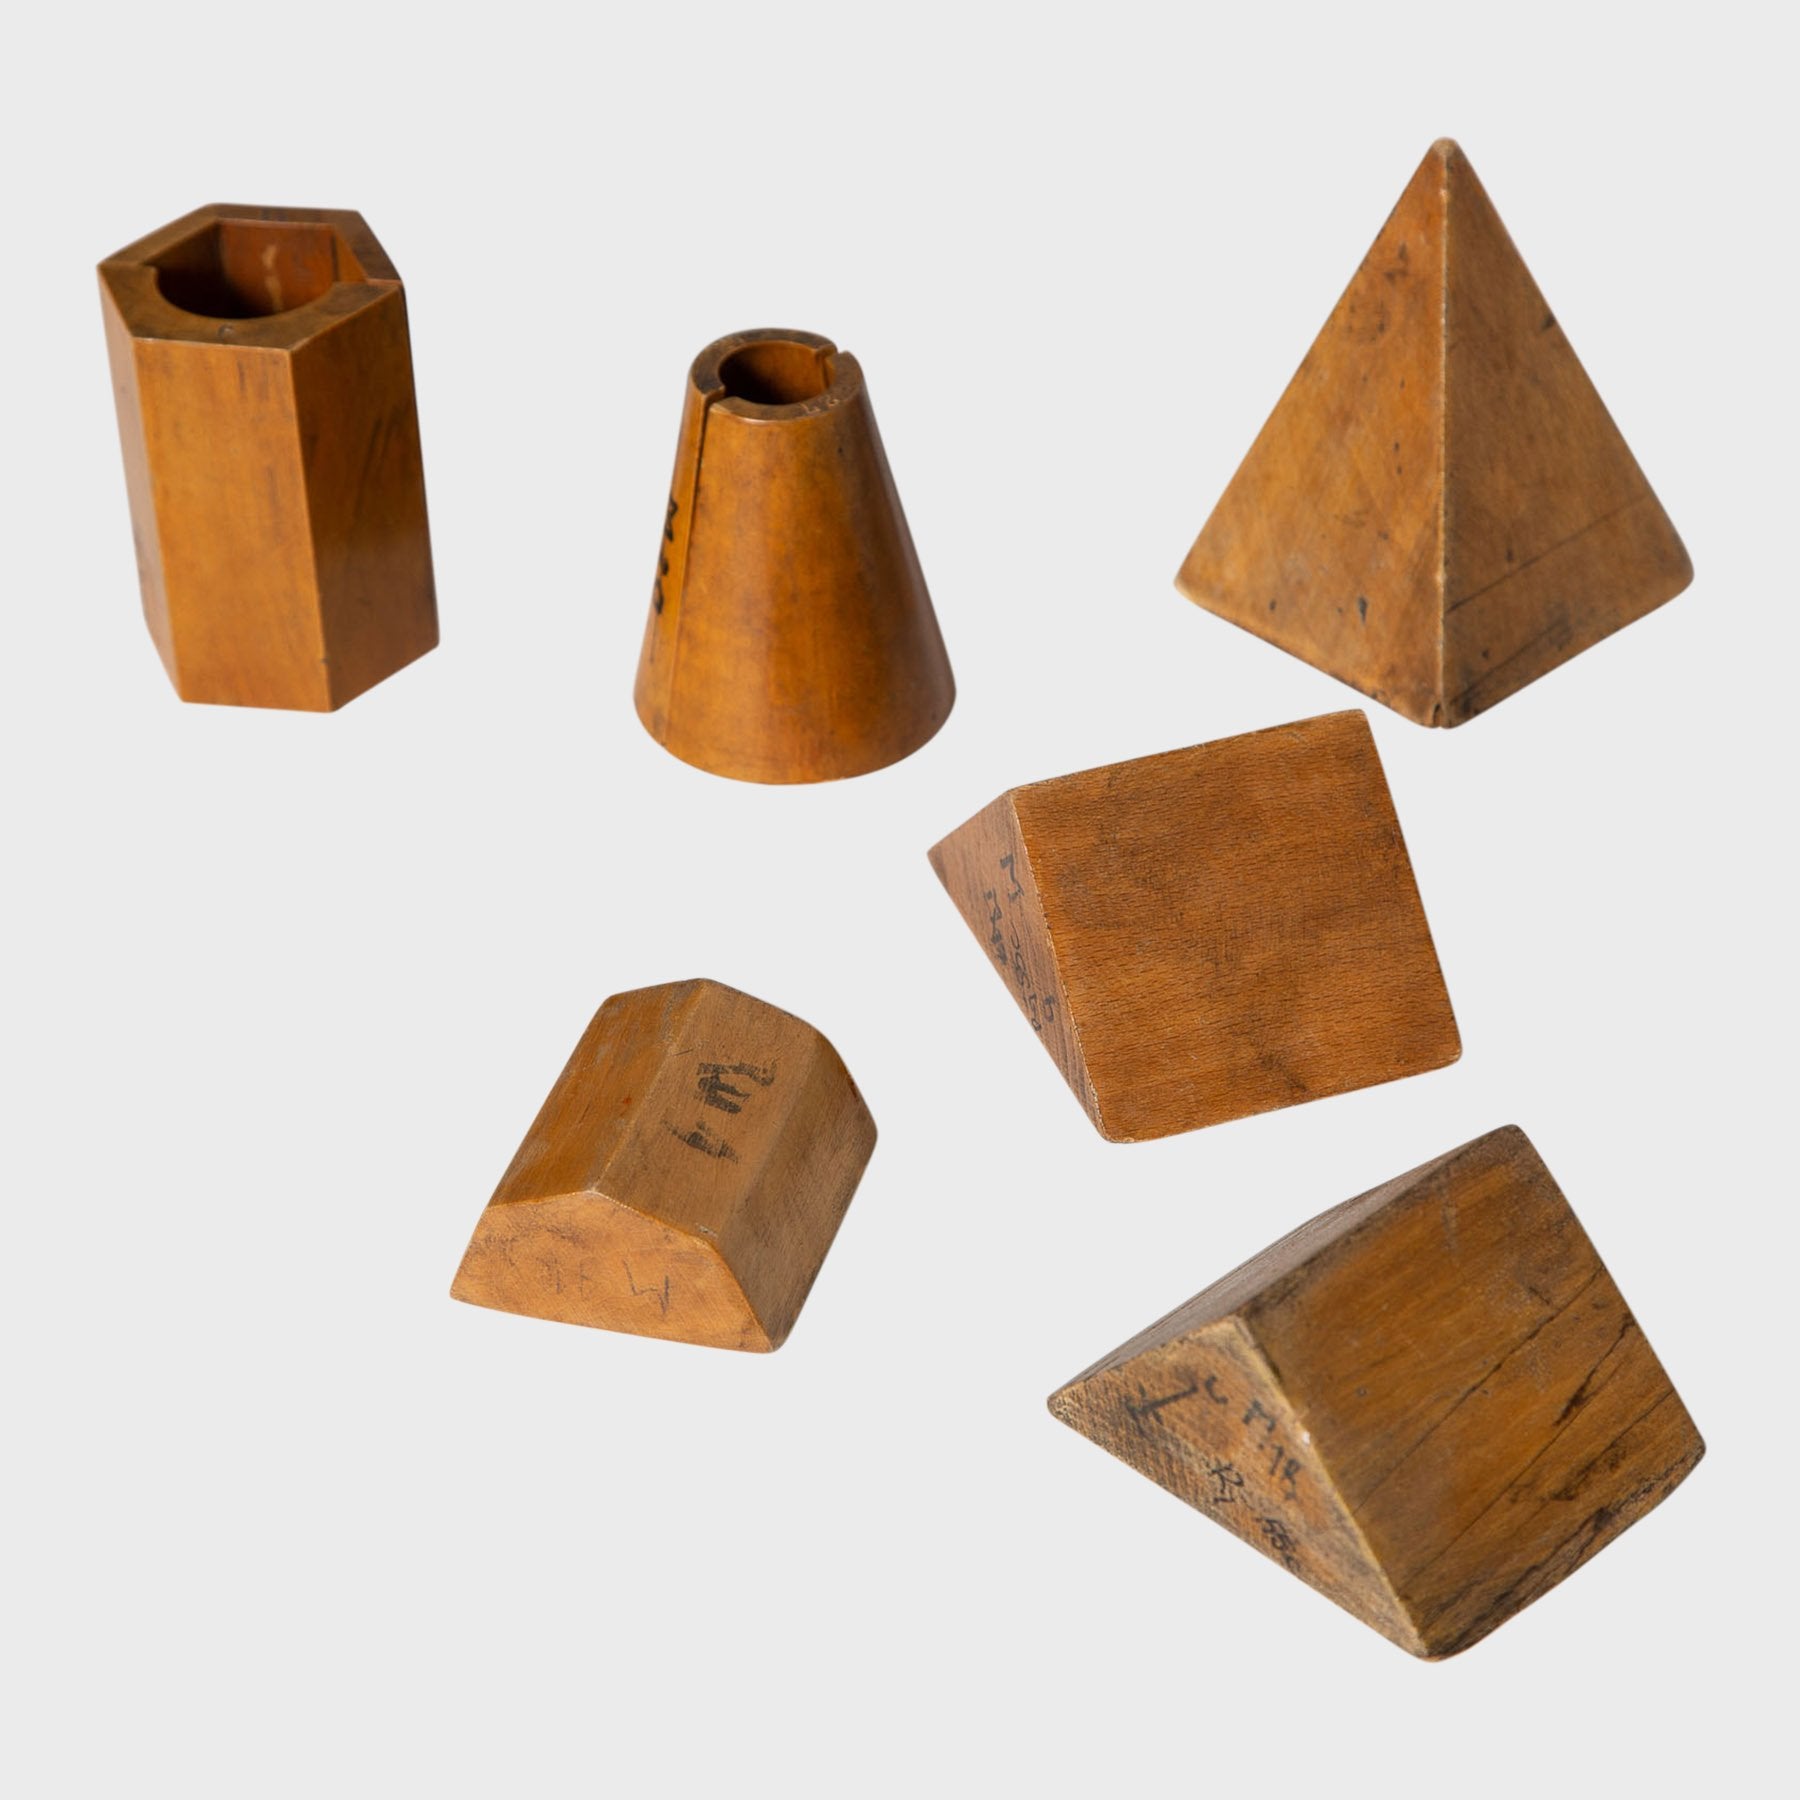 MAXFIELD PRIVATE COLLECTION | 1940'S GEOMETRIC WOOD FORMS